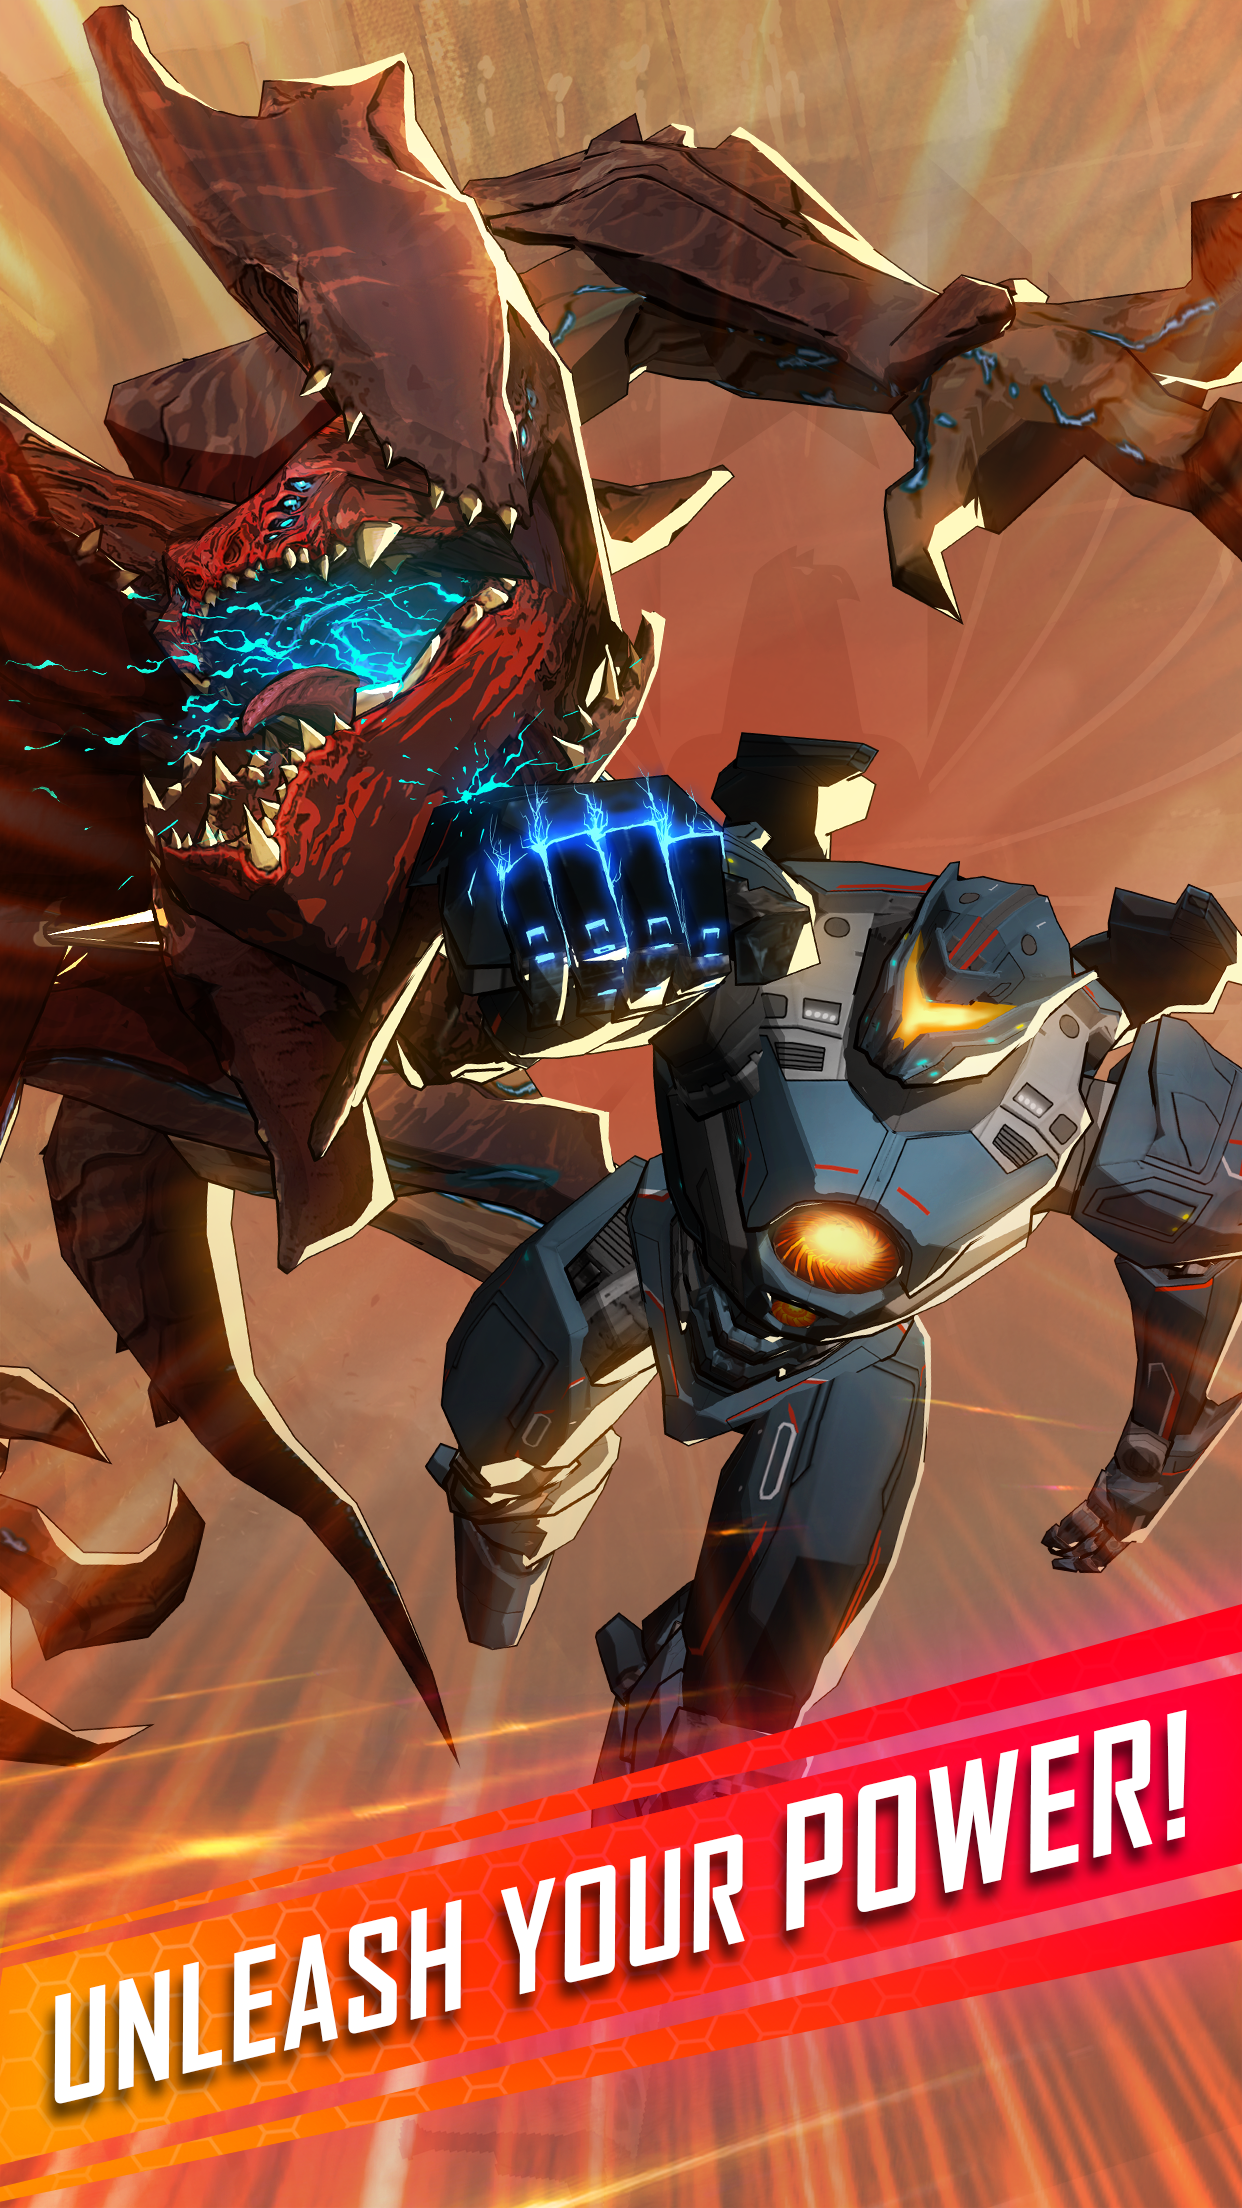 Screenshot 1 of Pacific Rim Breach Wars - Robot Puzzle Action RPG 